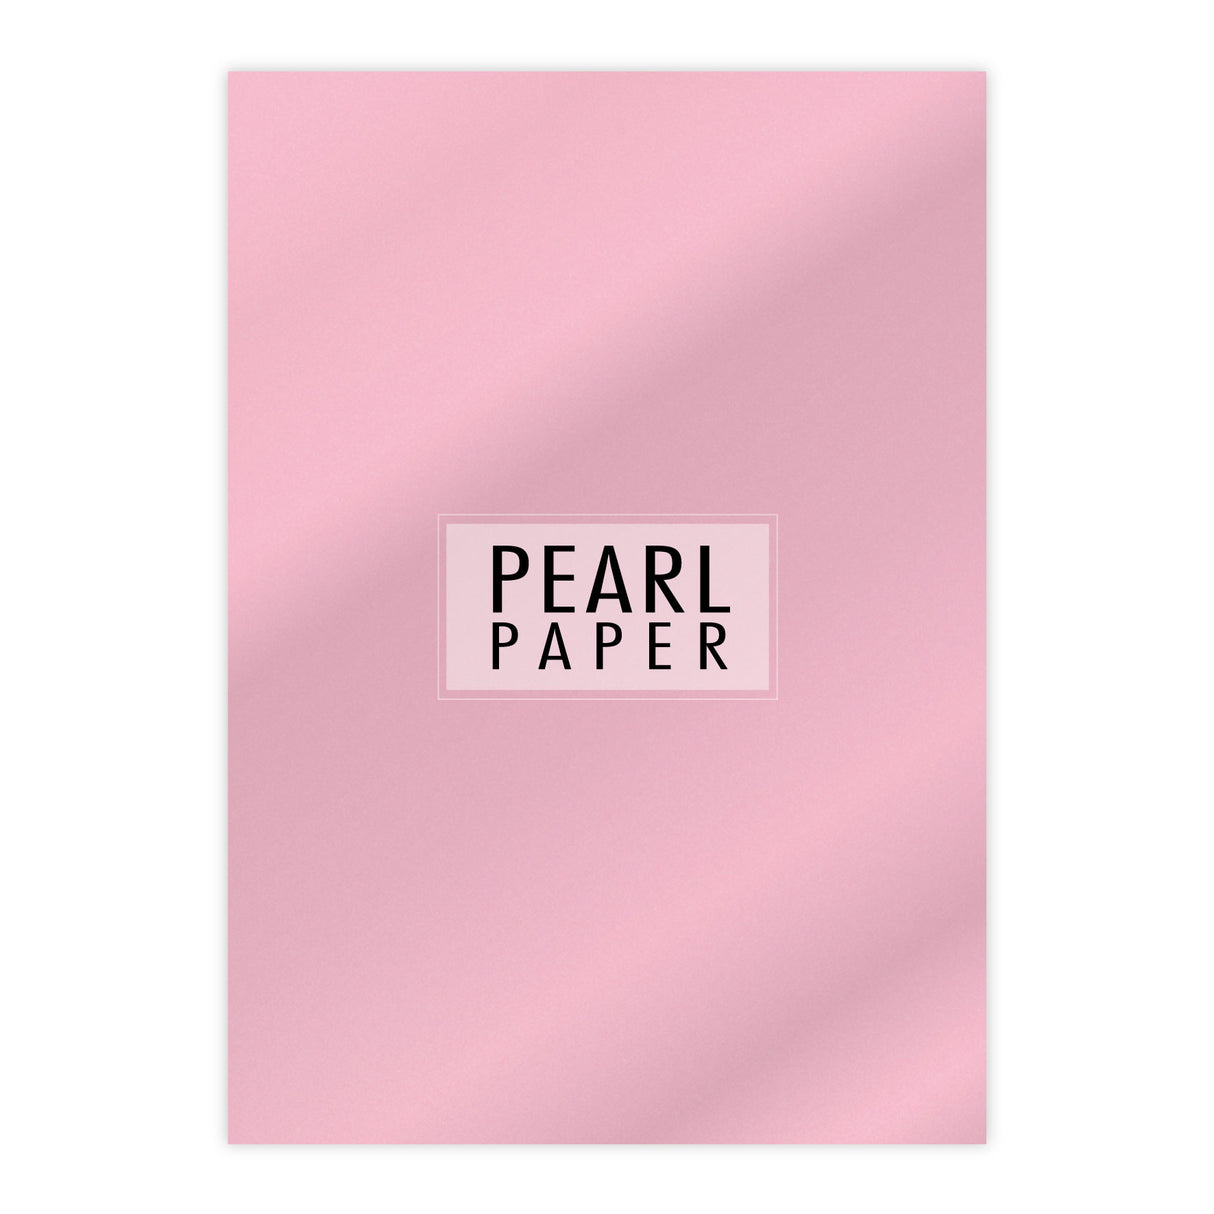 Chloes A4 Luxury Pearl Paper 10 Sheets Rose Quartz